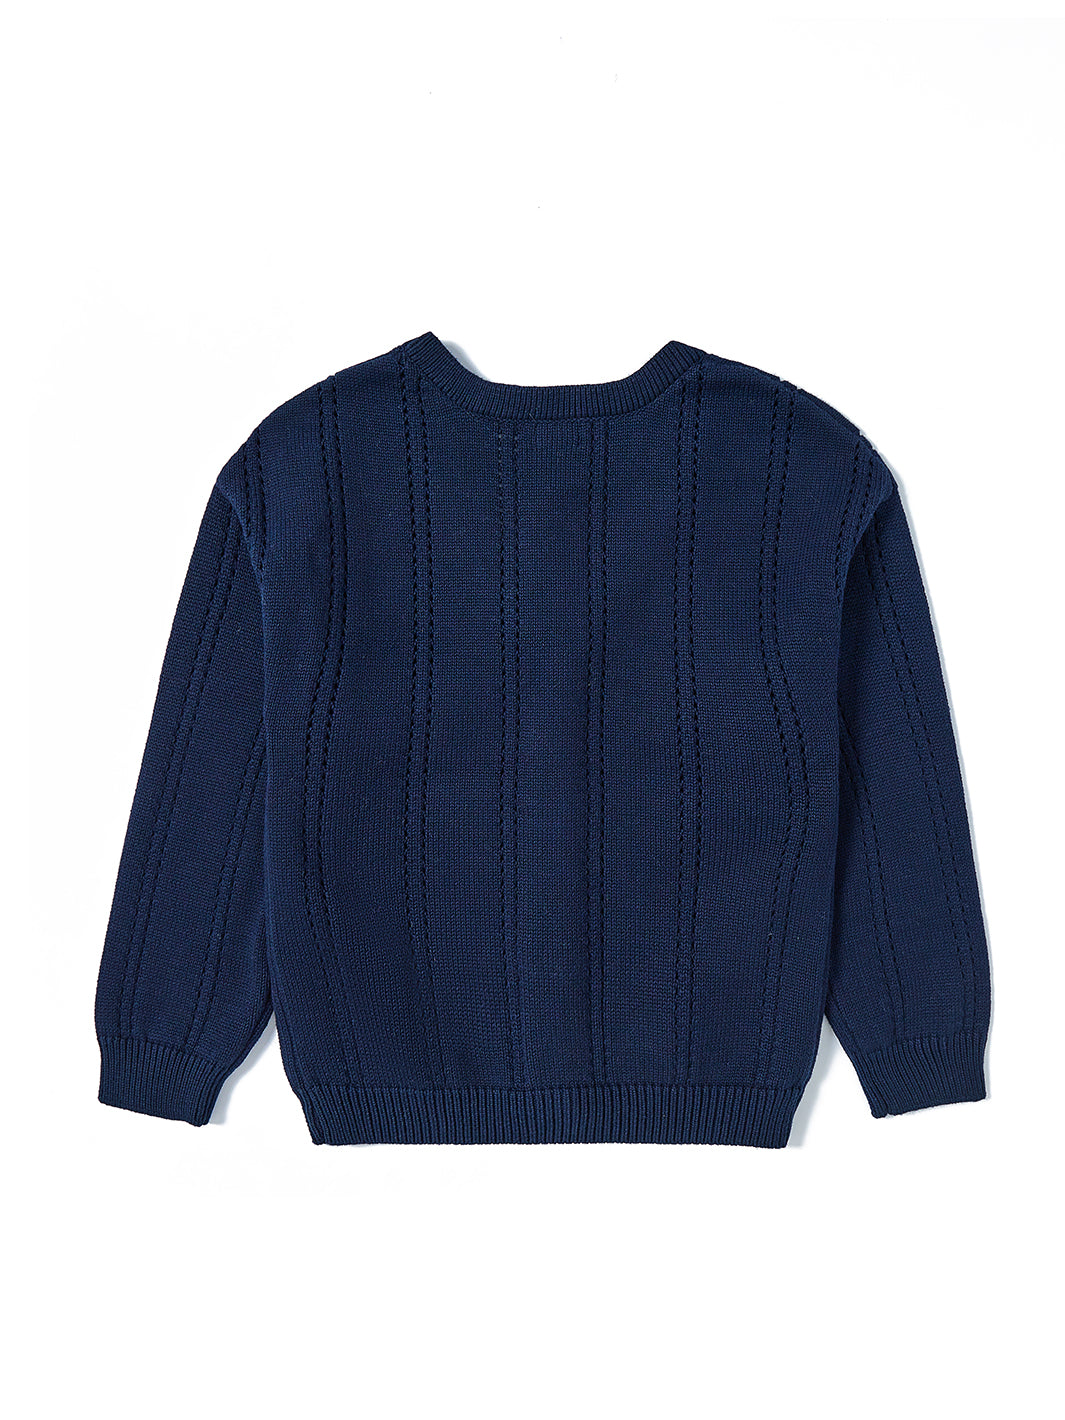 Toggle Button Sweater